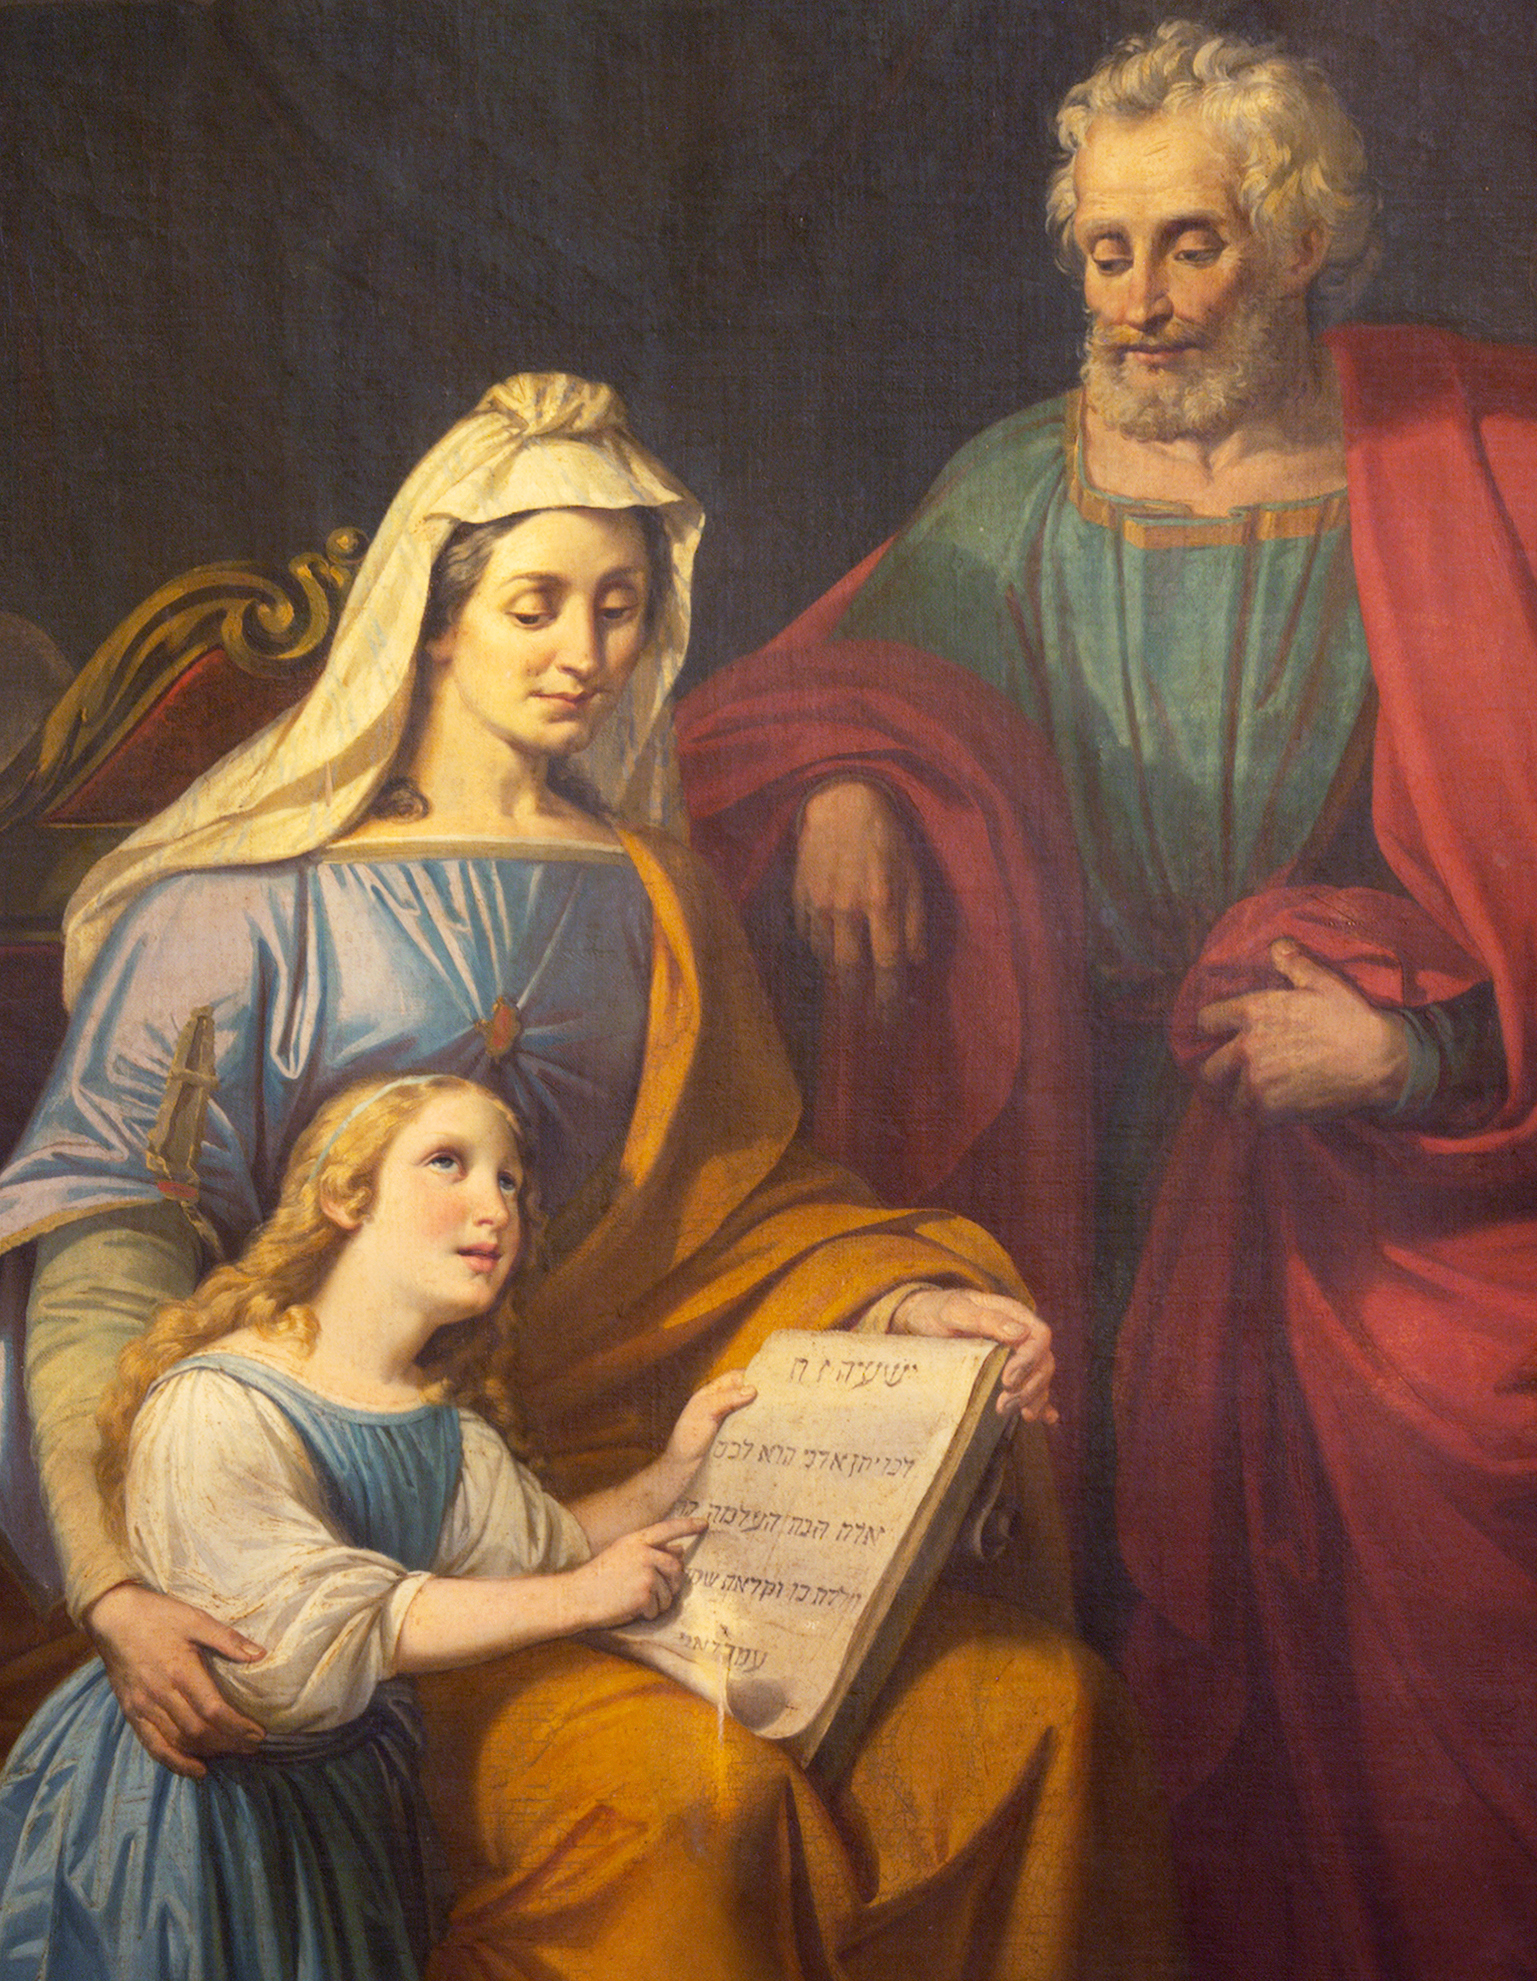 10 simple ways to celebrate the feast day of Saints Joachim and Anne